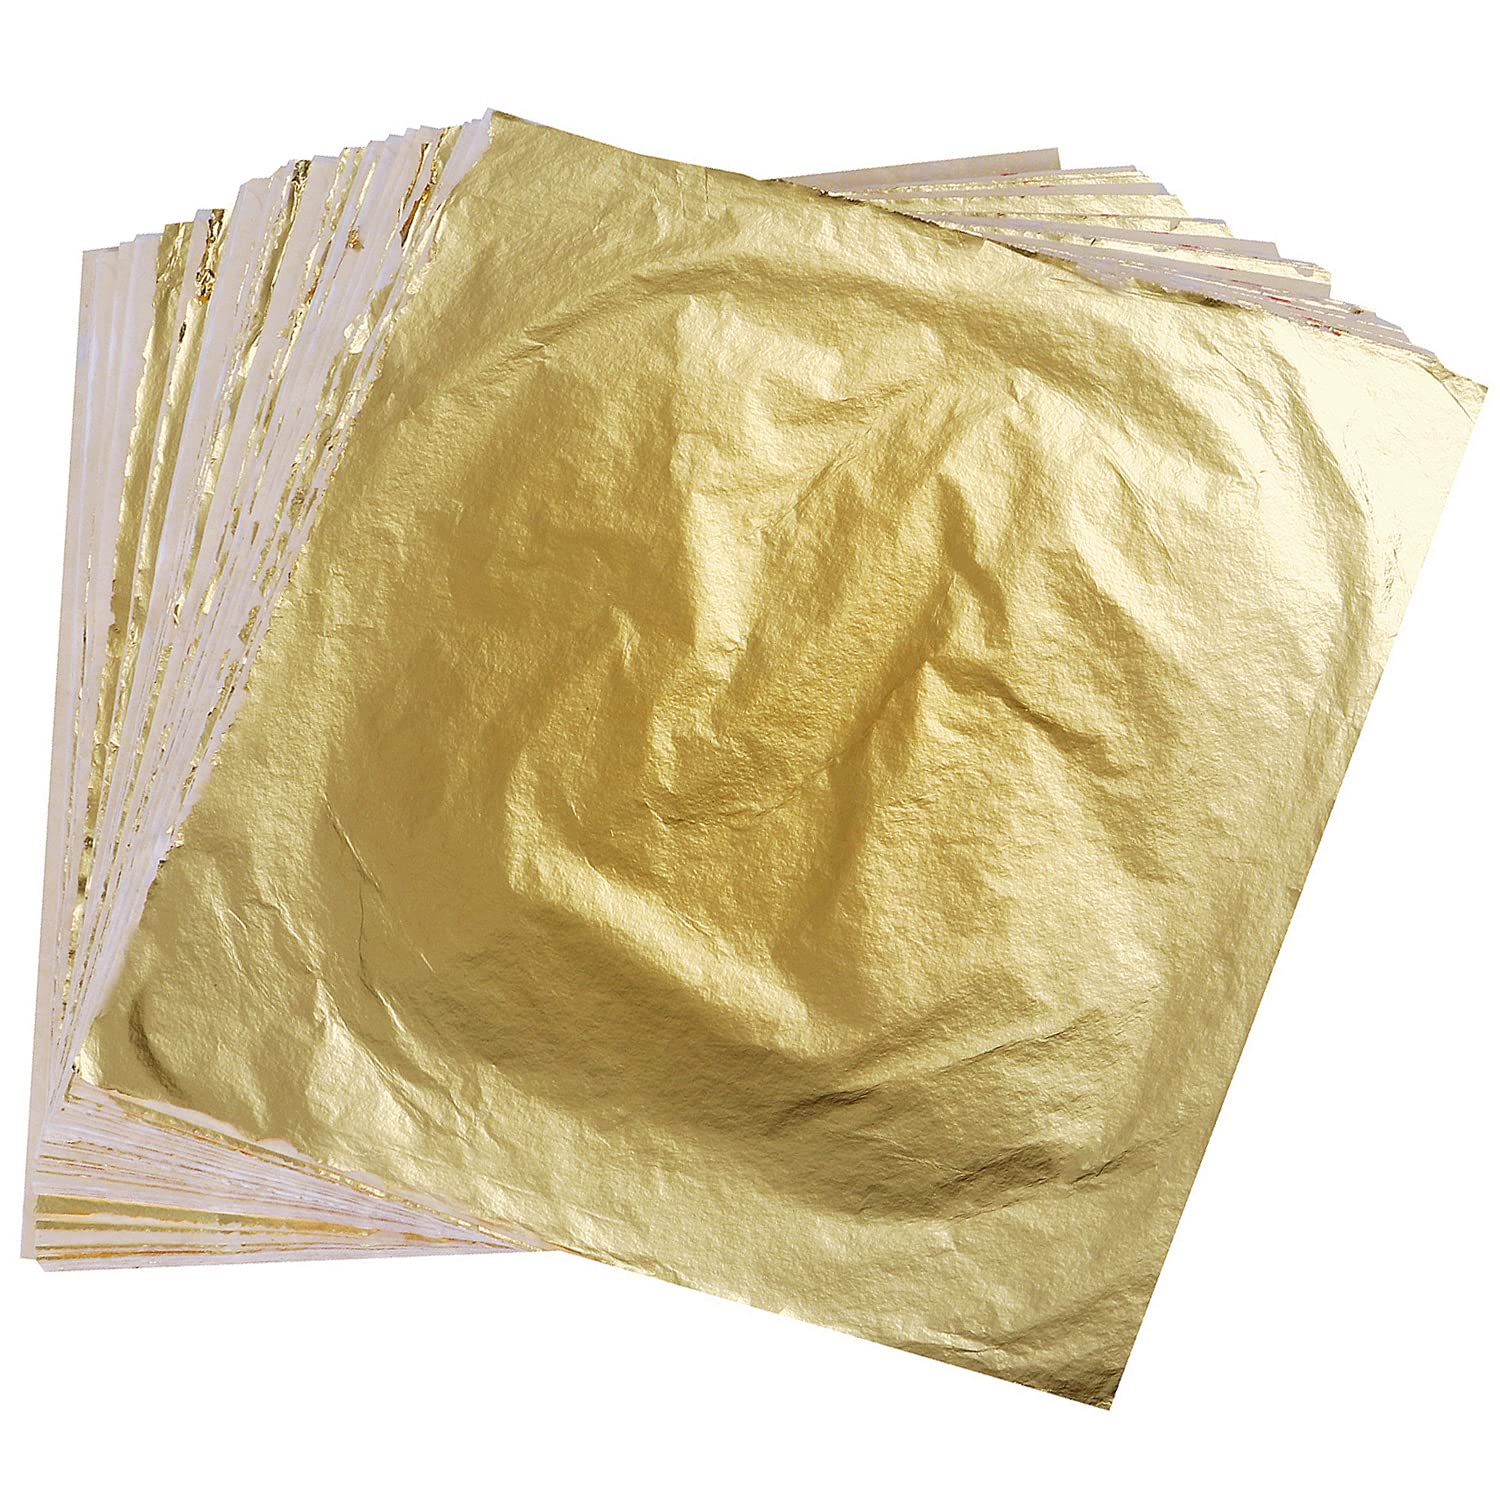 Gigules 100 Sheets Imitation Gold Leaf 5.5 x 5.5 Inches Gold Foil Paper for Arts Painting Gilding Crafting Decoration